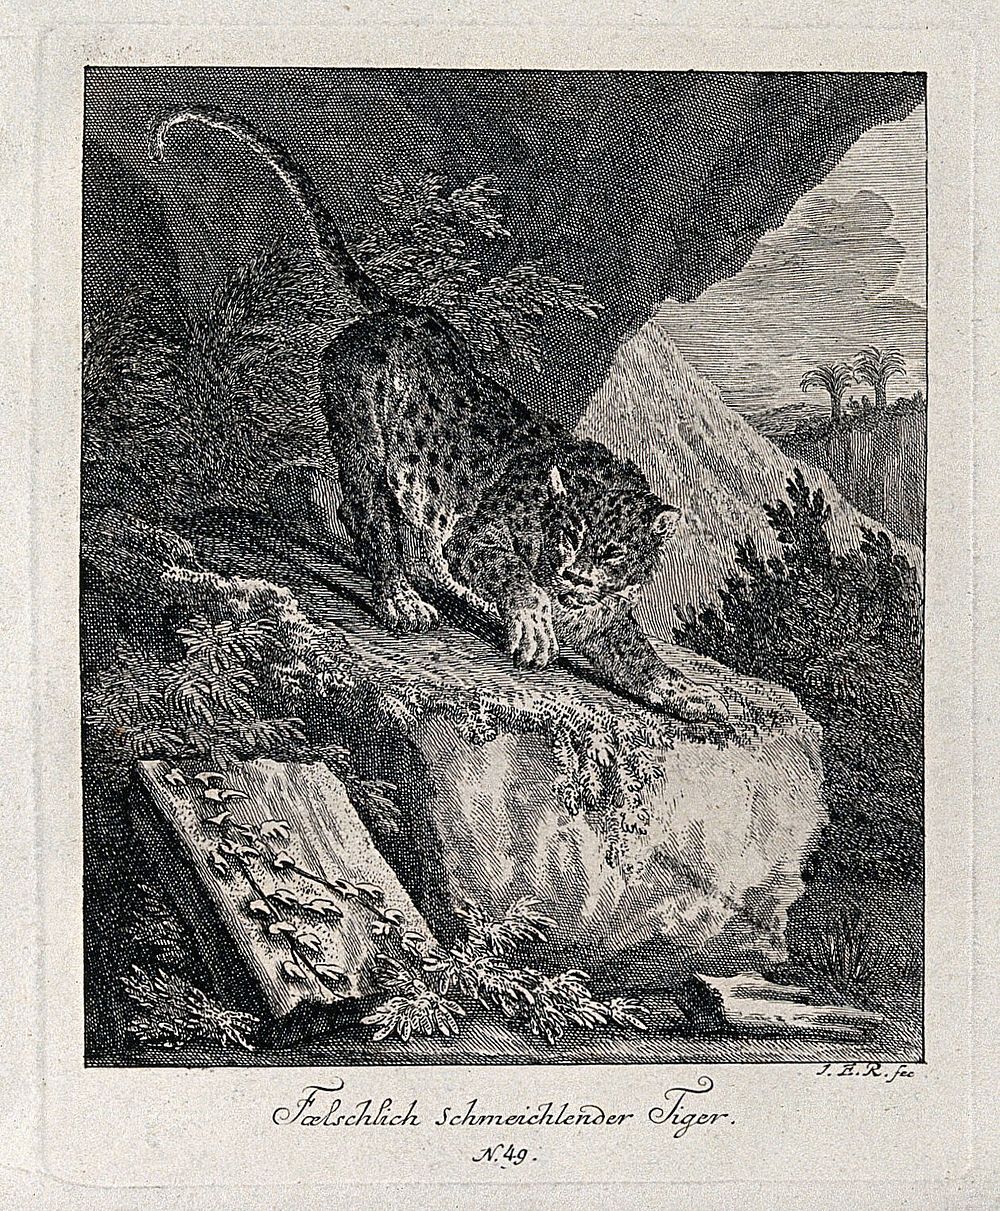 A tiger about to leap off a rock in an exotic landscape. Etching by J. E. Ridinger.